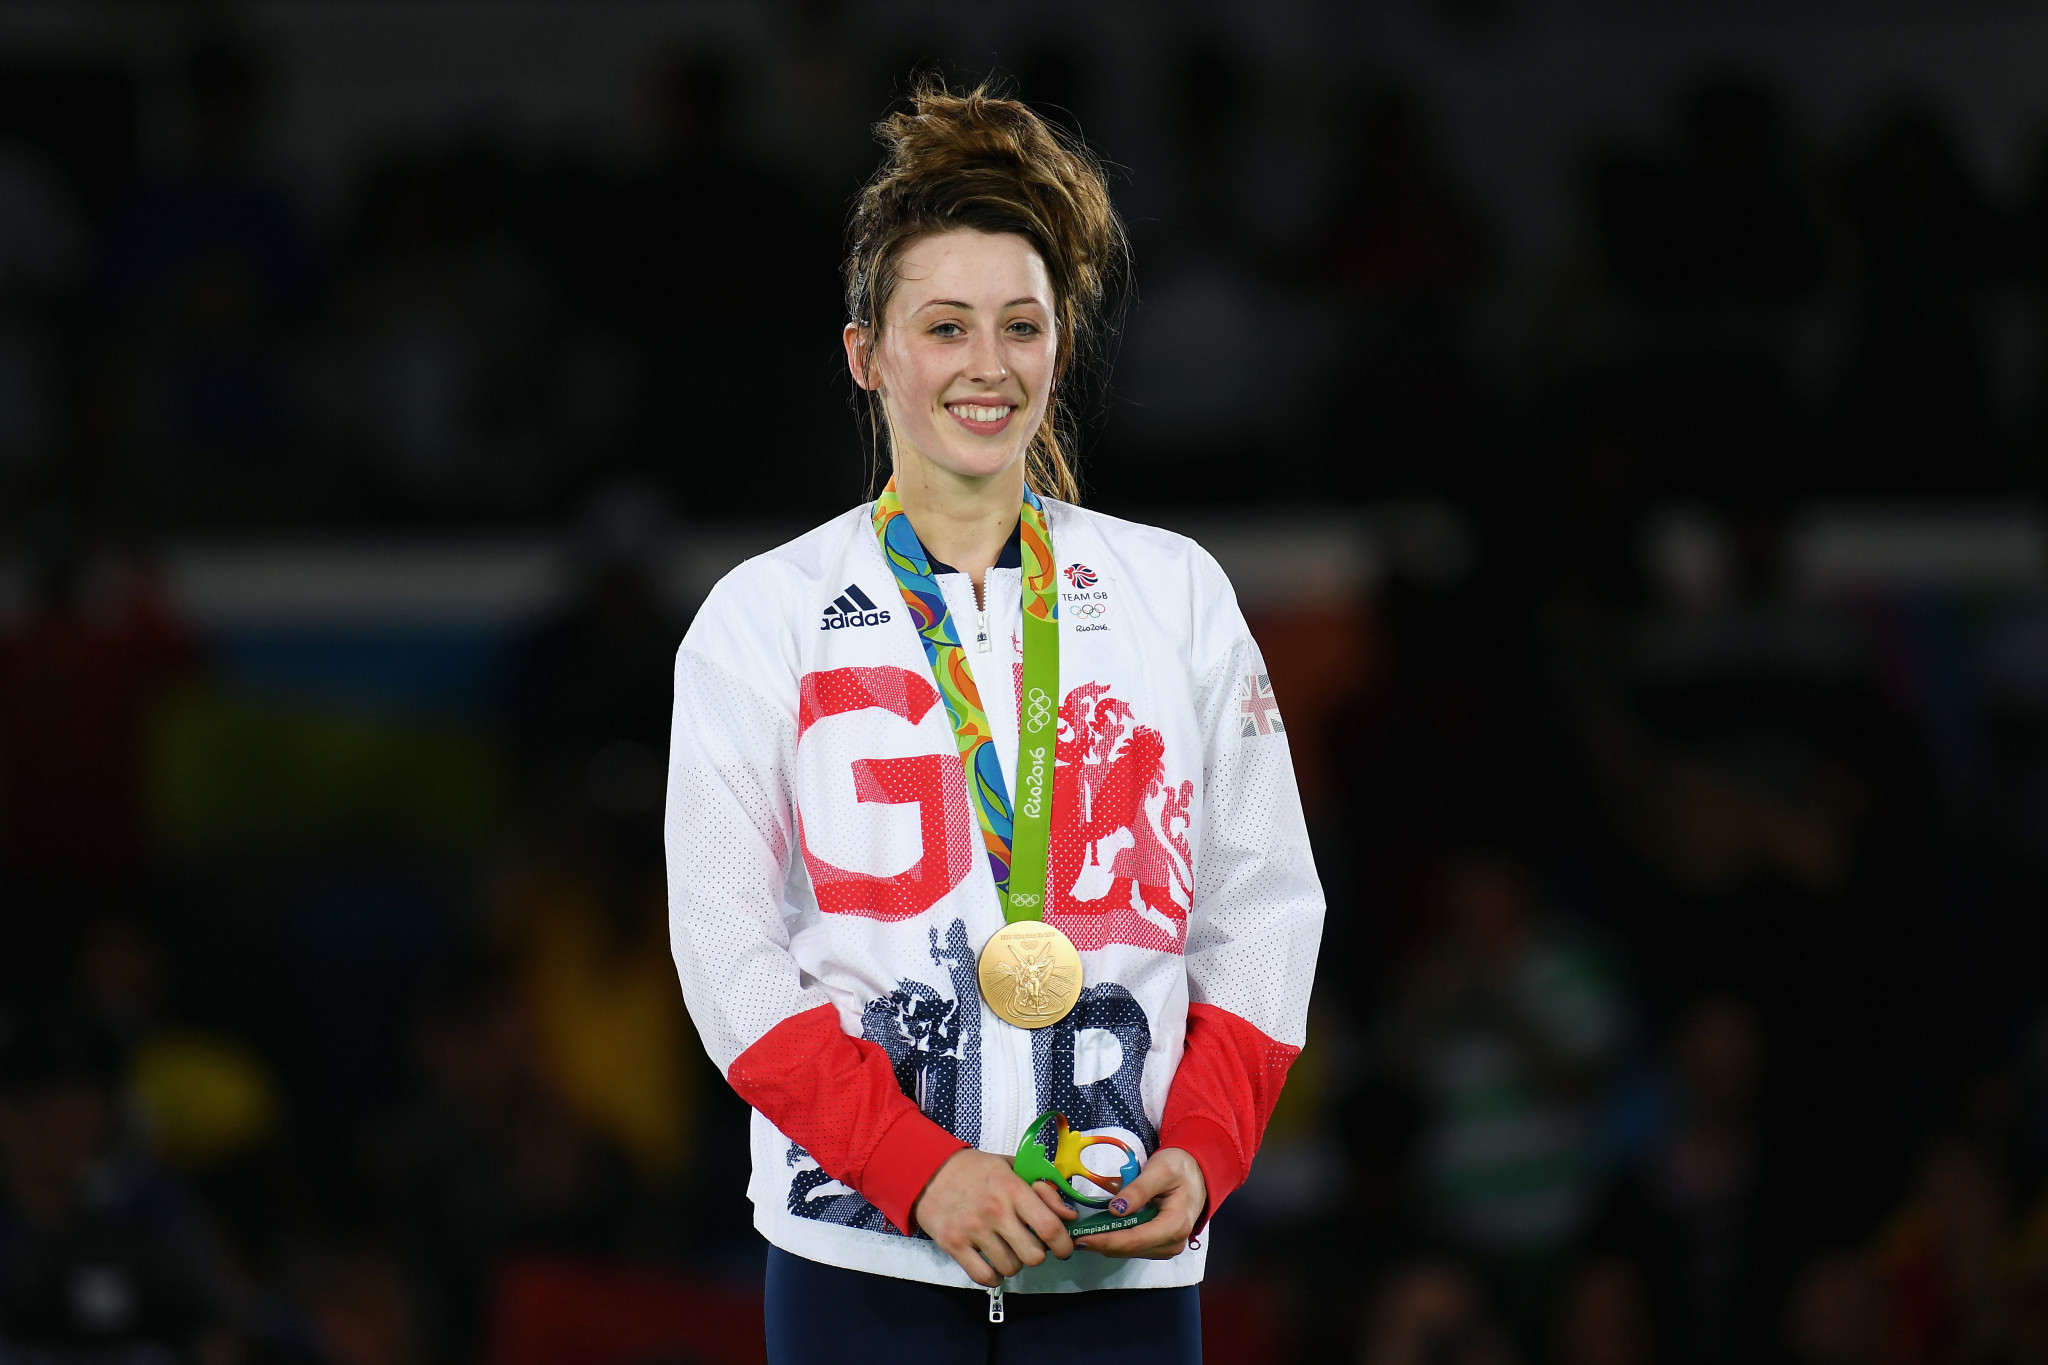 Jade Jones' gold was one of three taekwondo medals Britain won at the Rio 2016 Olympics ©Getty Images